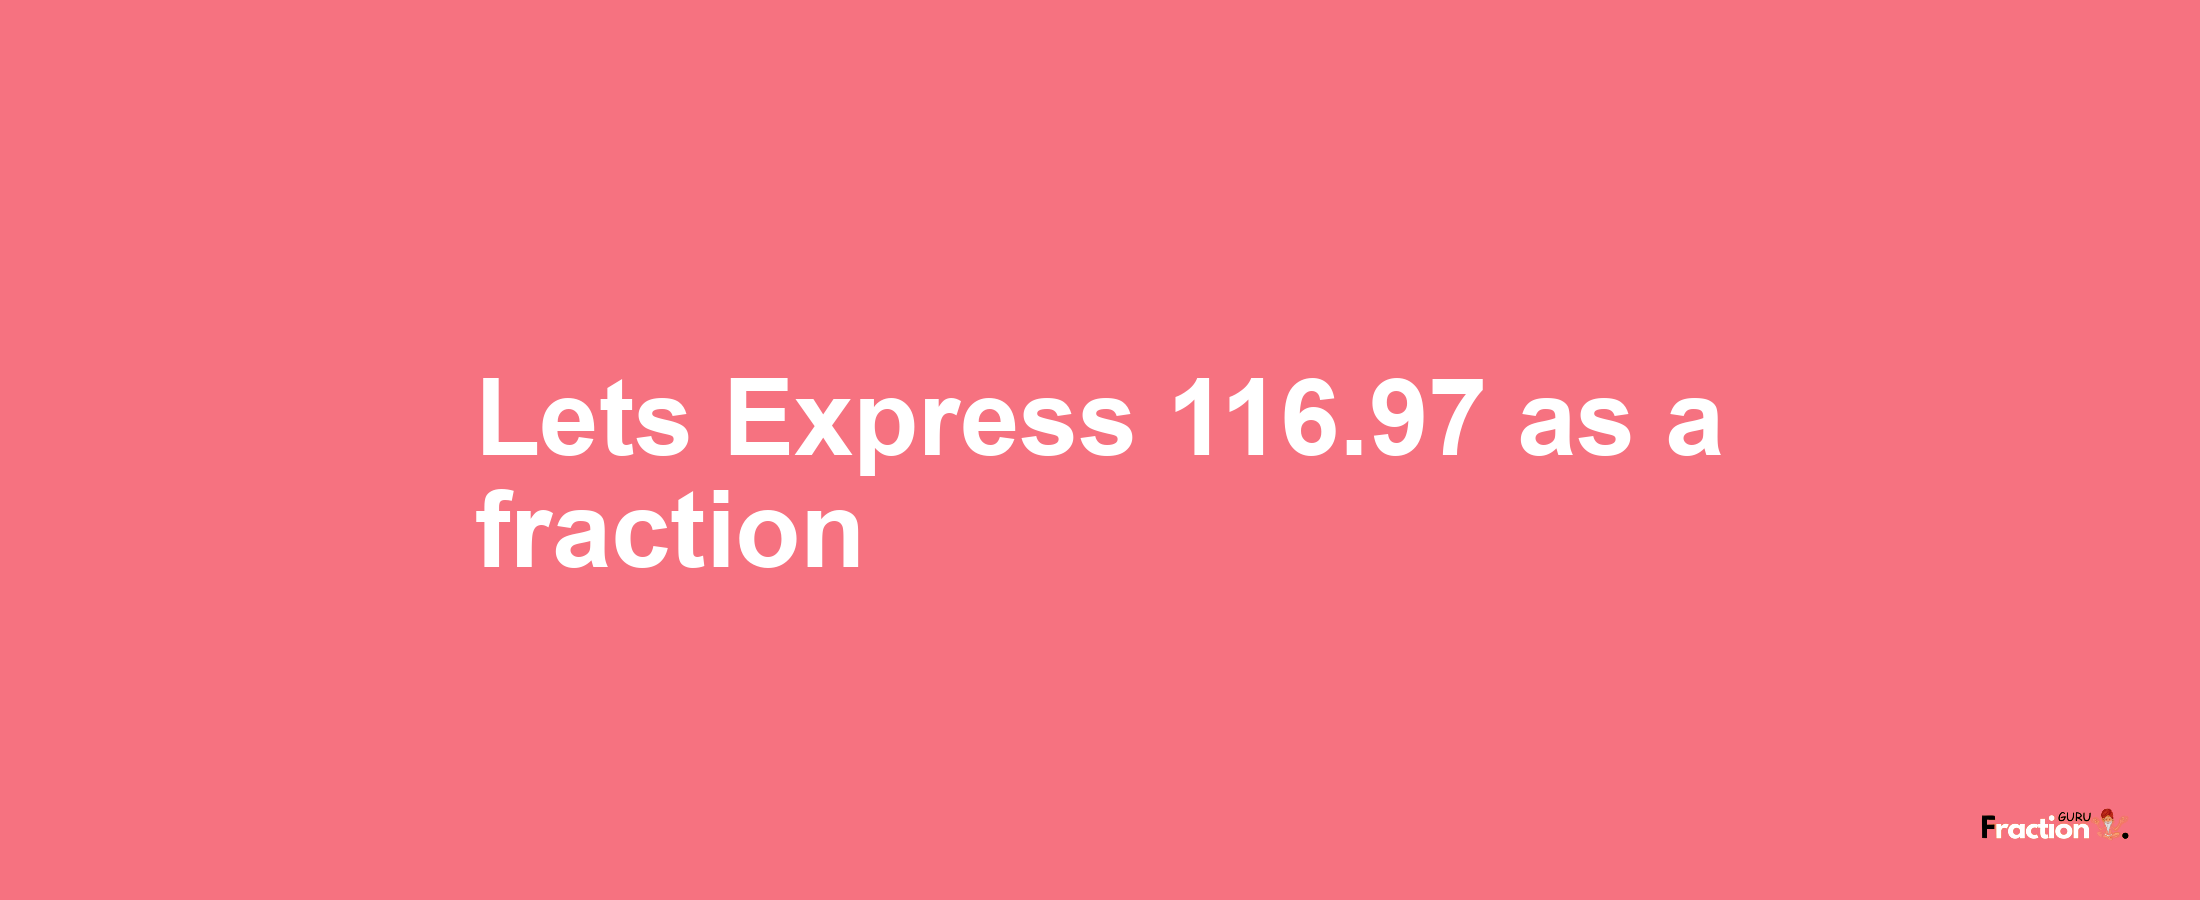 Lets Express 116.97 as afraction